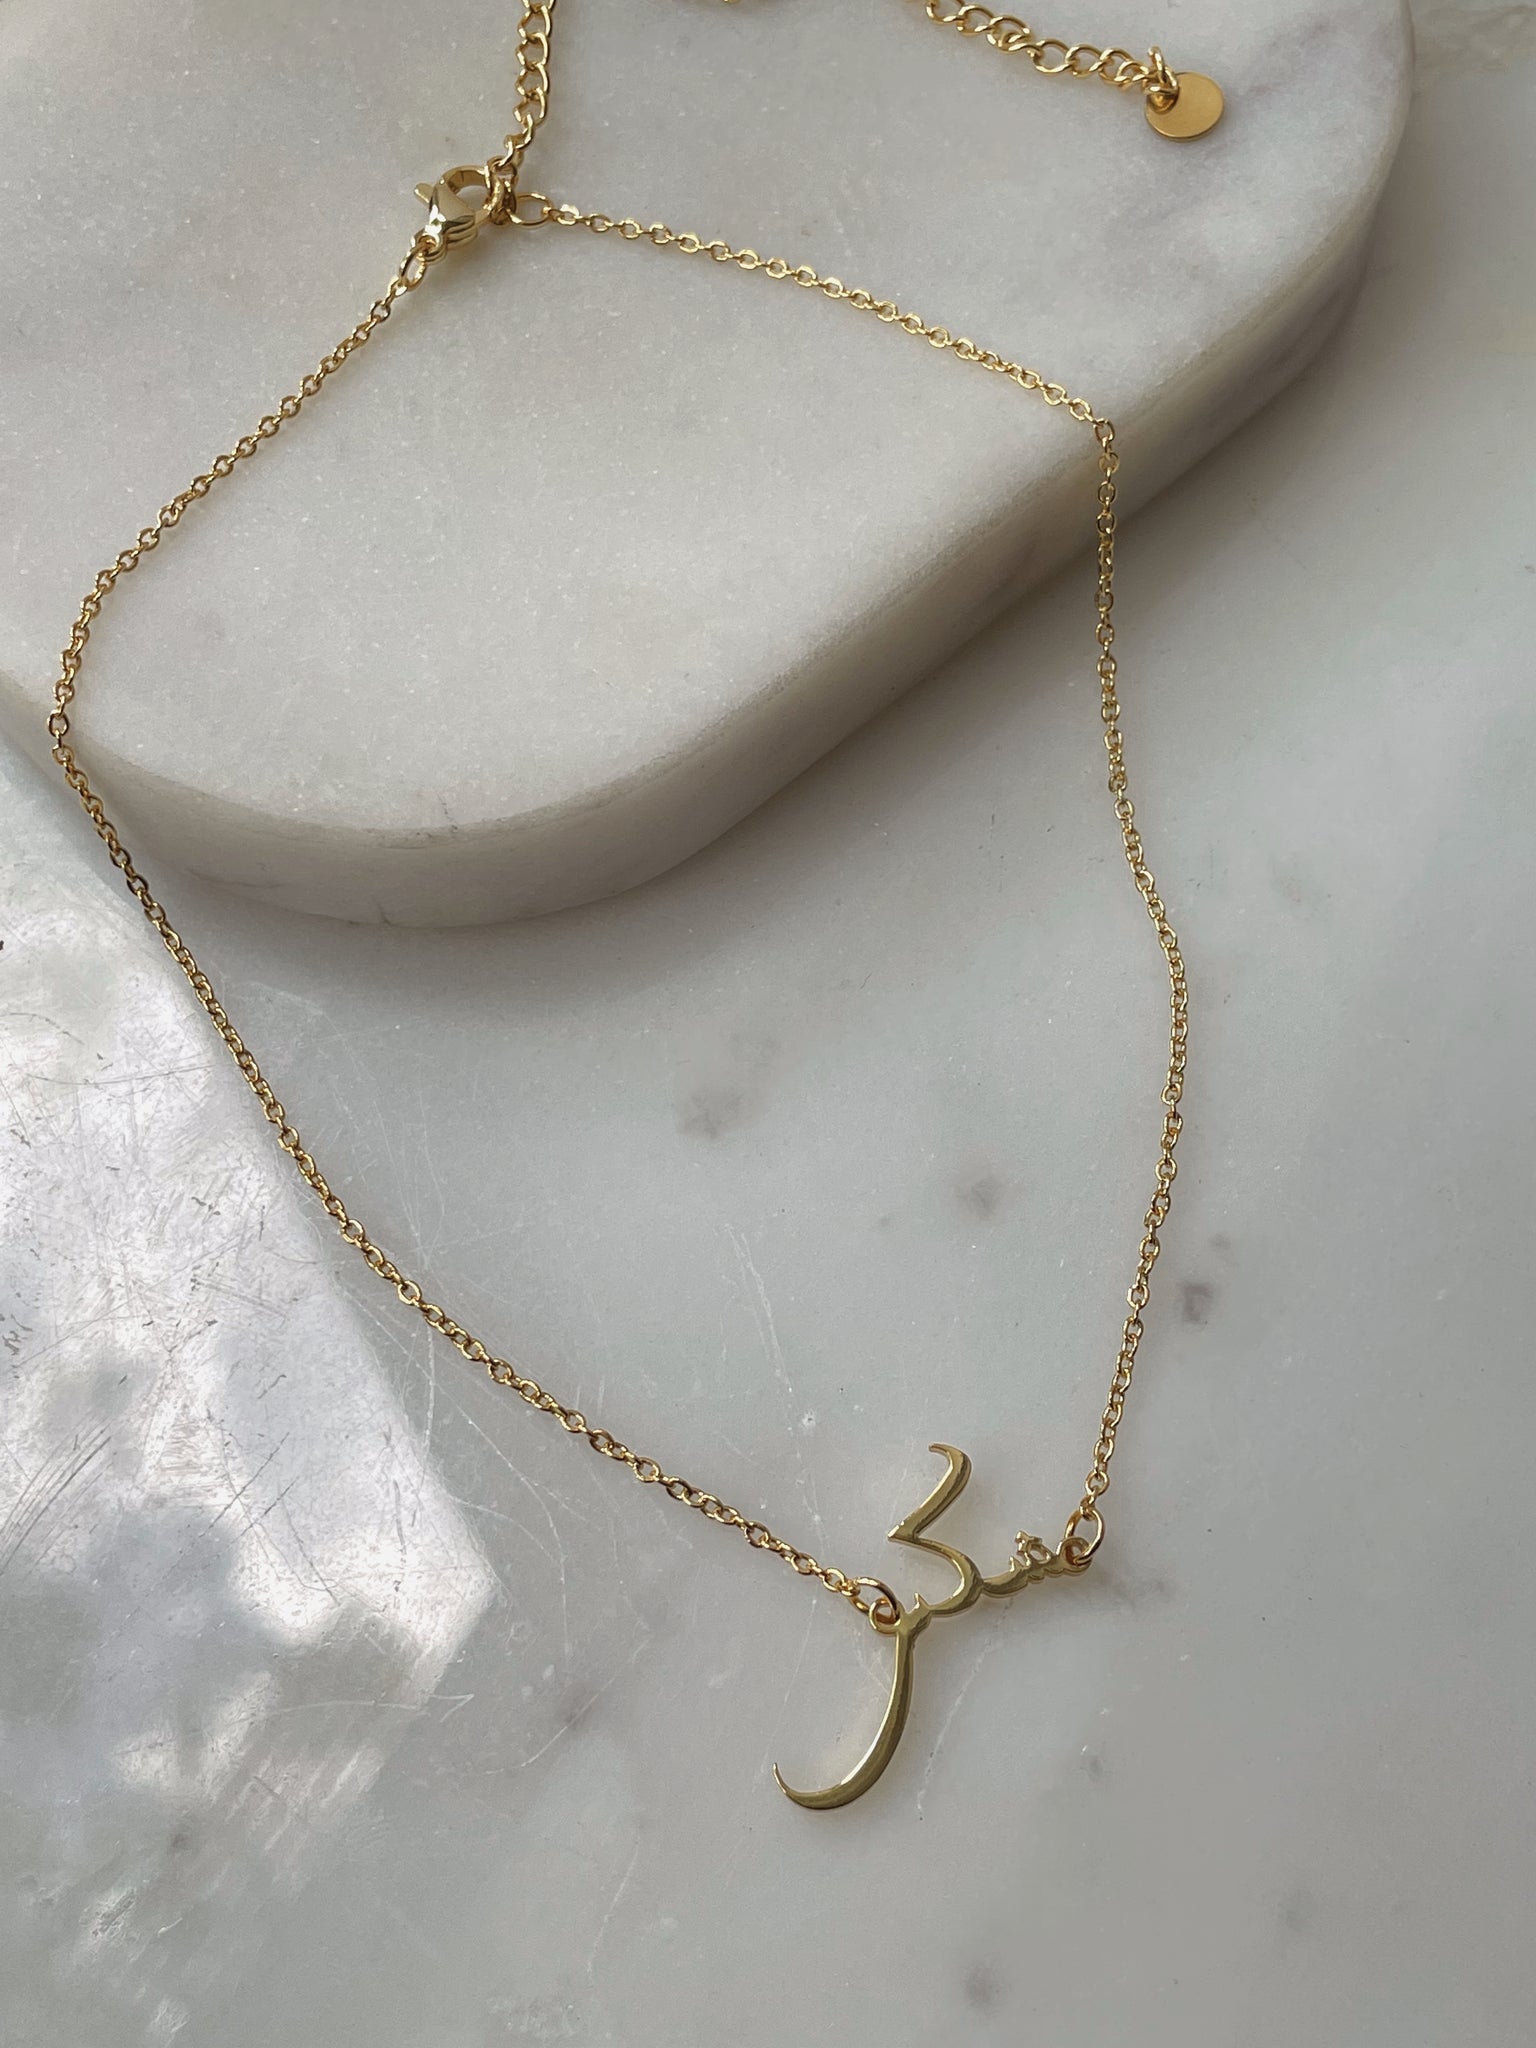 ARABIC GRATITUDE (SHUKR) Necklace | Adult/Kids | Tarnish Free | 18ct Gold Plated Stainless Steel Arabic Word Necklace